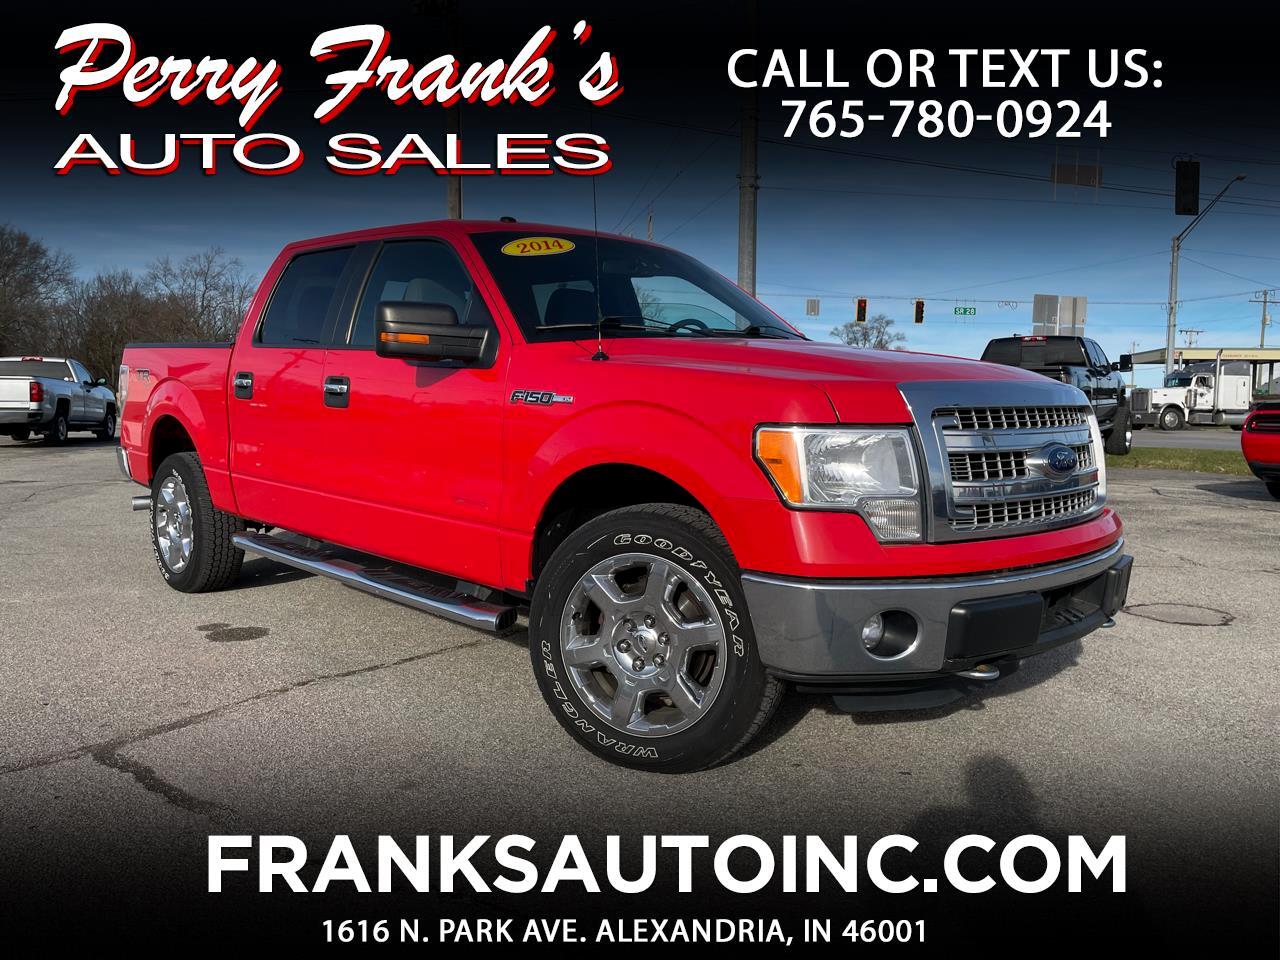 2014 Ford F-150 XLT SuperCrew 5.5-ft. Bed 4WD